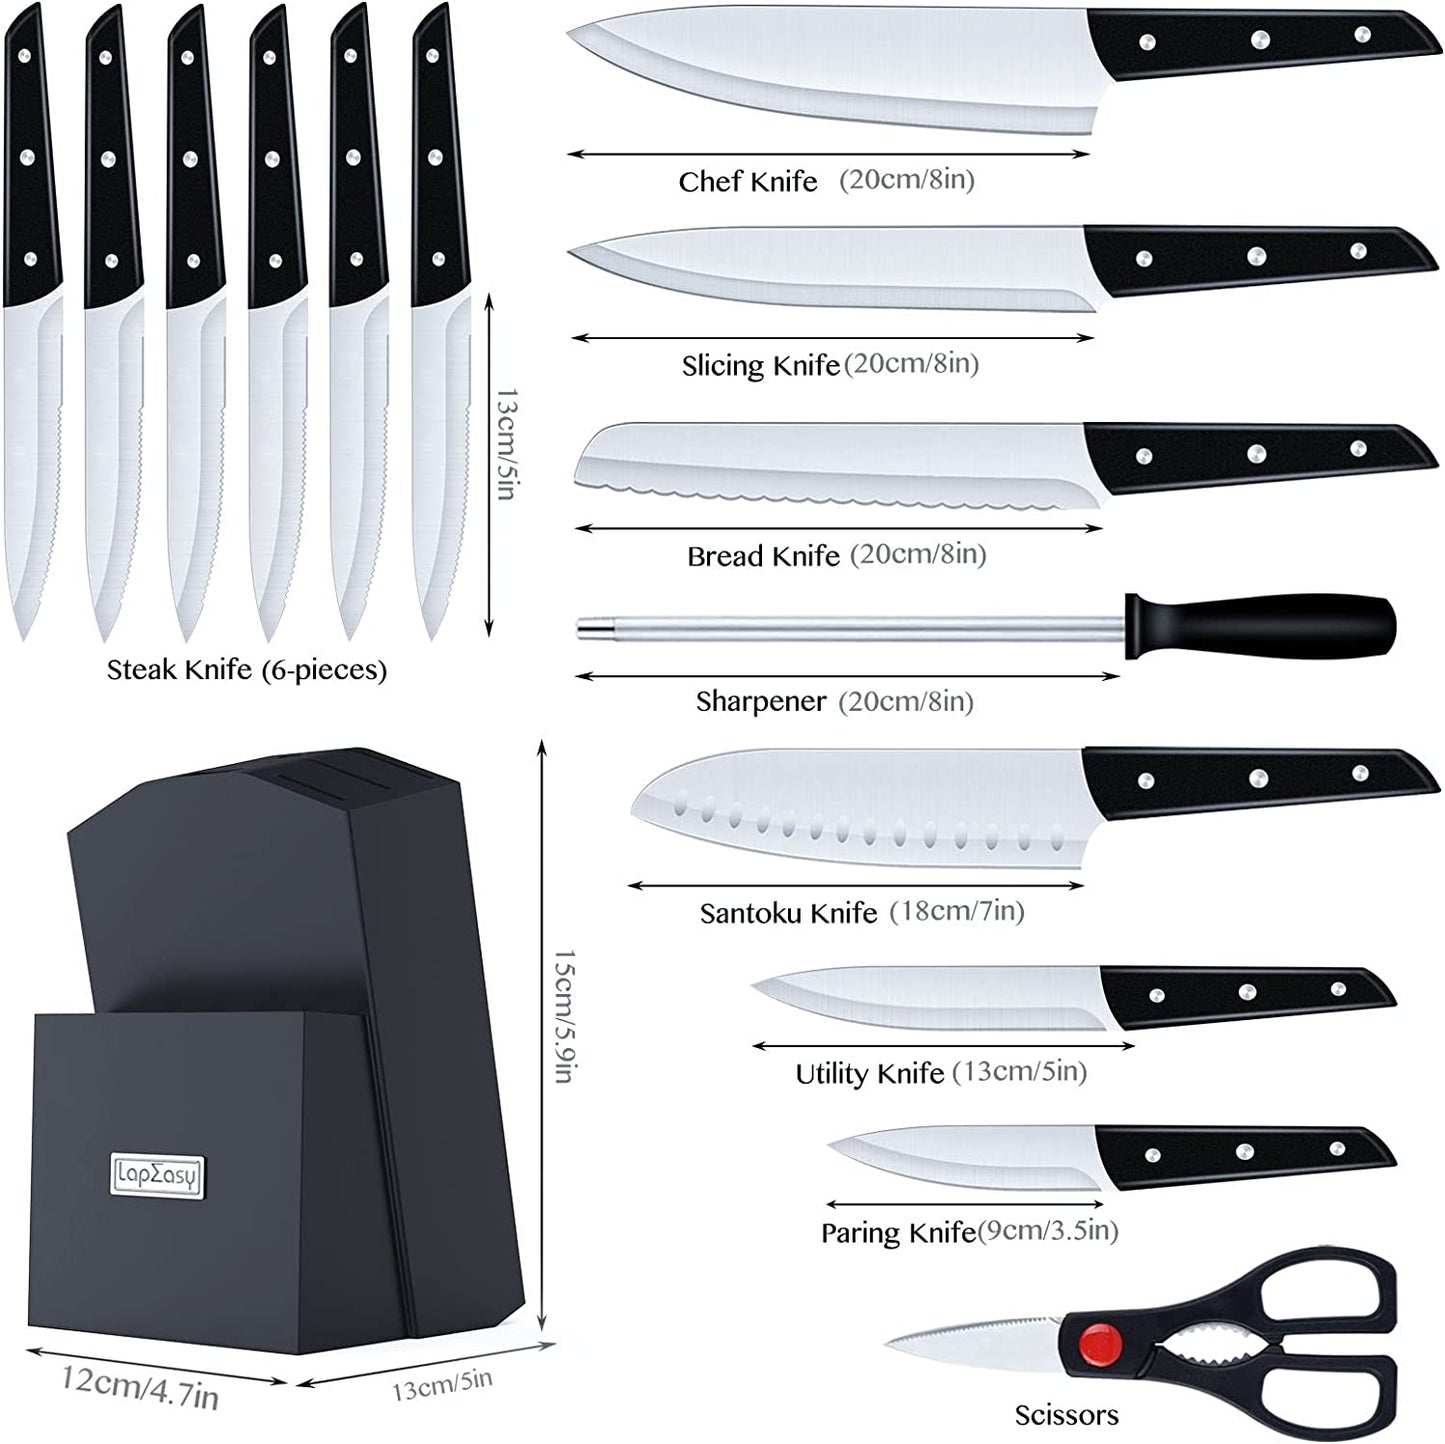 Knife Set With Block,  LapEasy 15 Pieces Kitchen Knife Set With Pine Block Holder, Knife Block Set With Sharpener,  High Stainless Steel Knives With Comfortable-Grip ABS Handles.